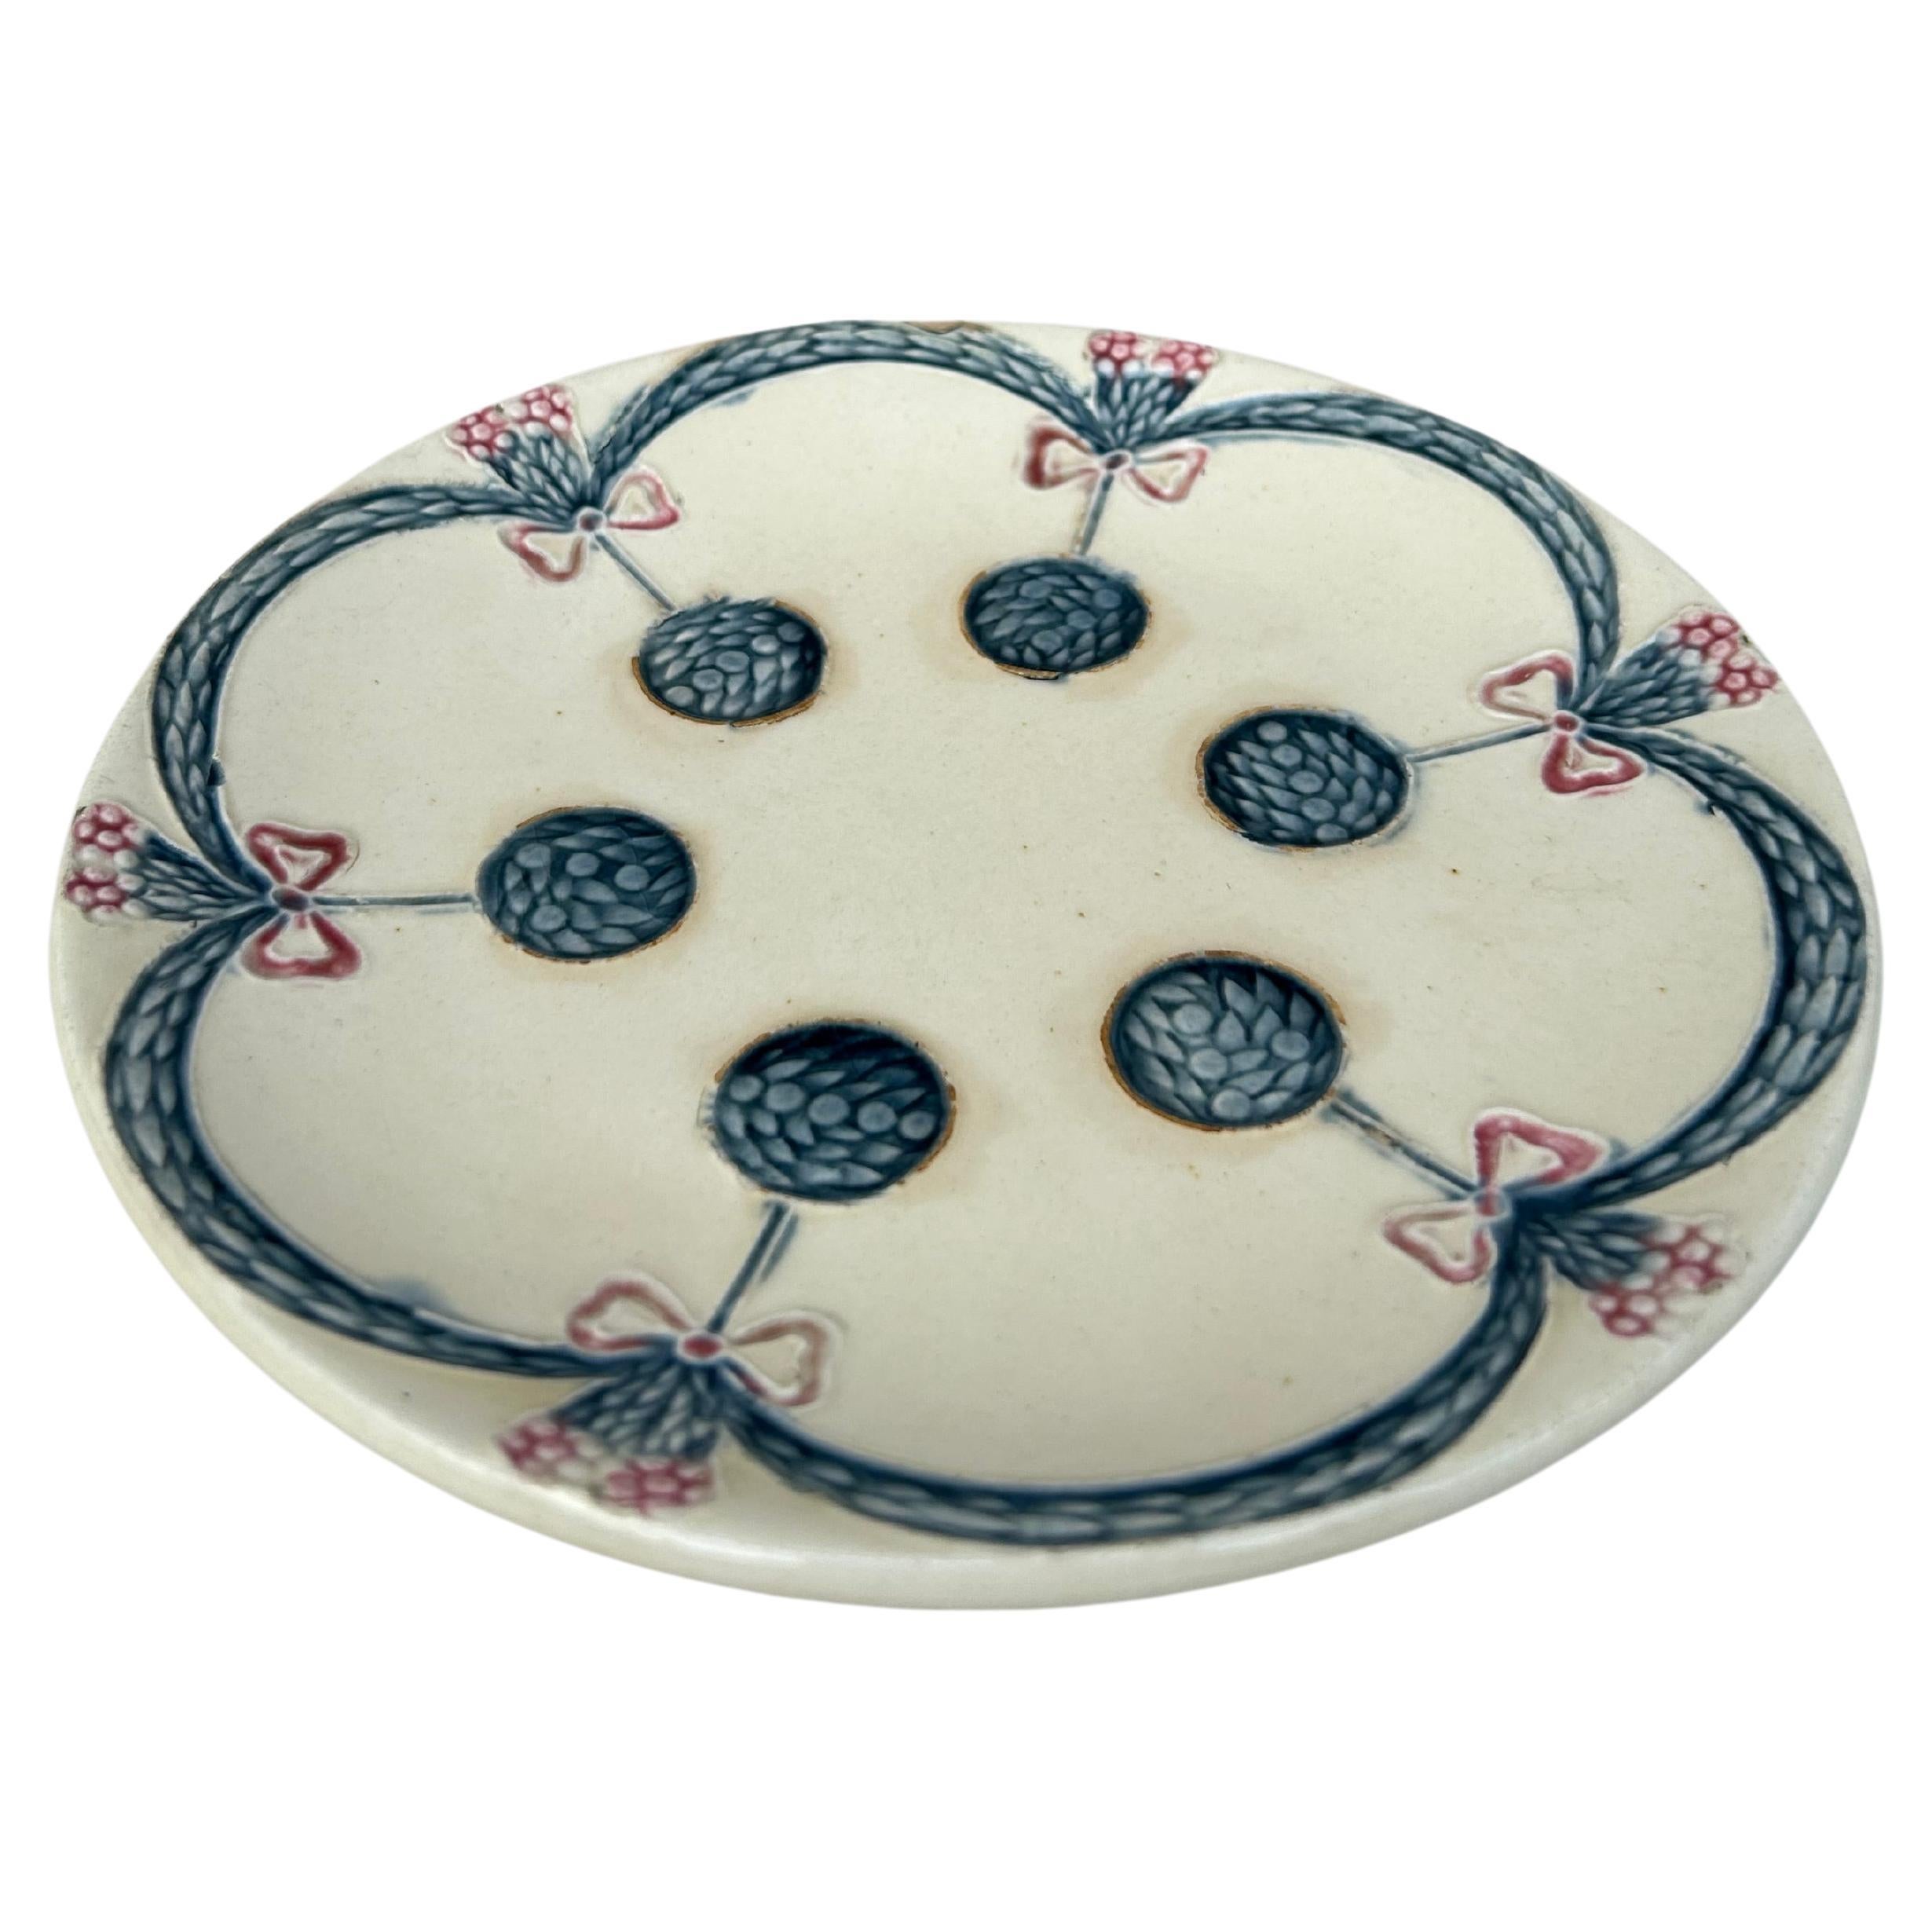 Majolica Flowers Plate Villeroy Boch circa 1890.
Garlands and bows.